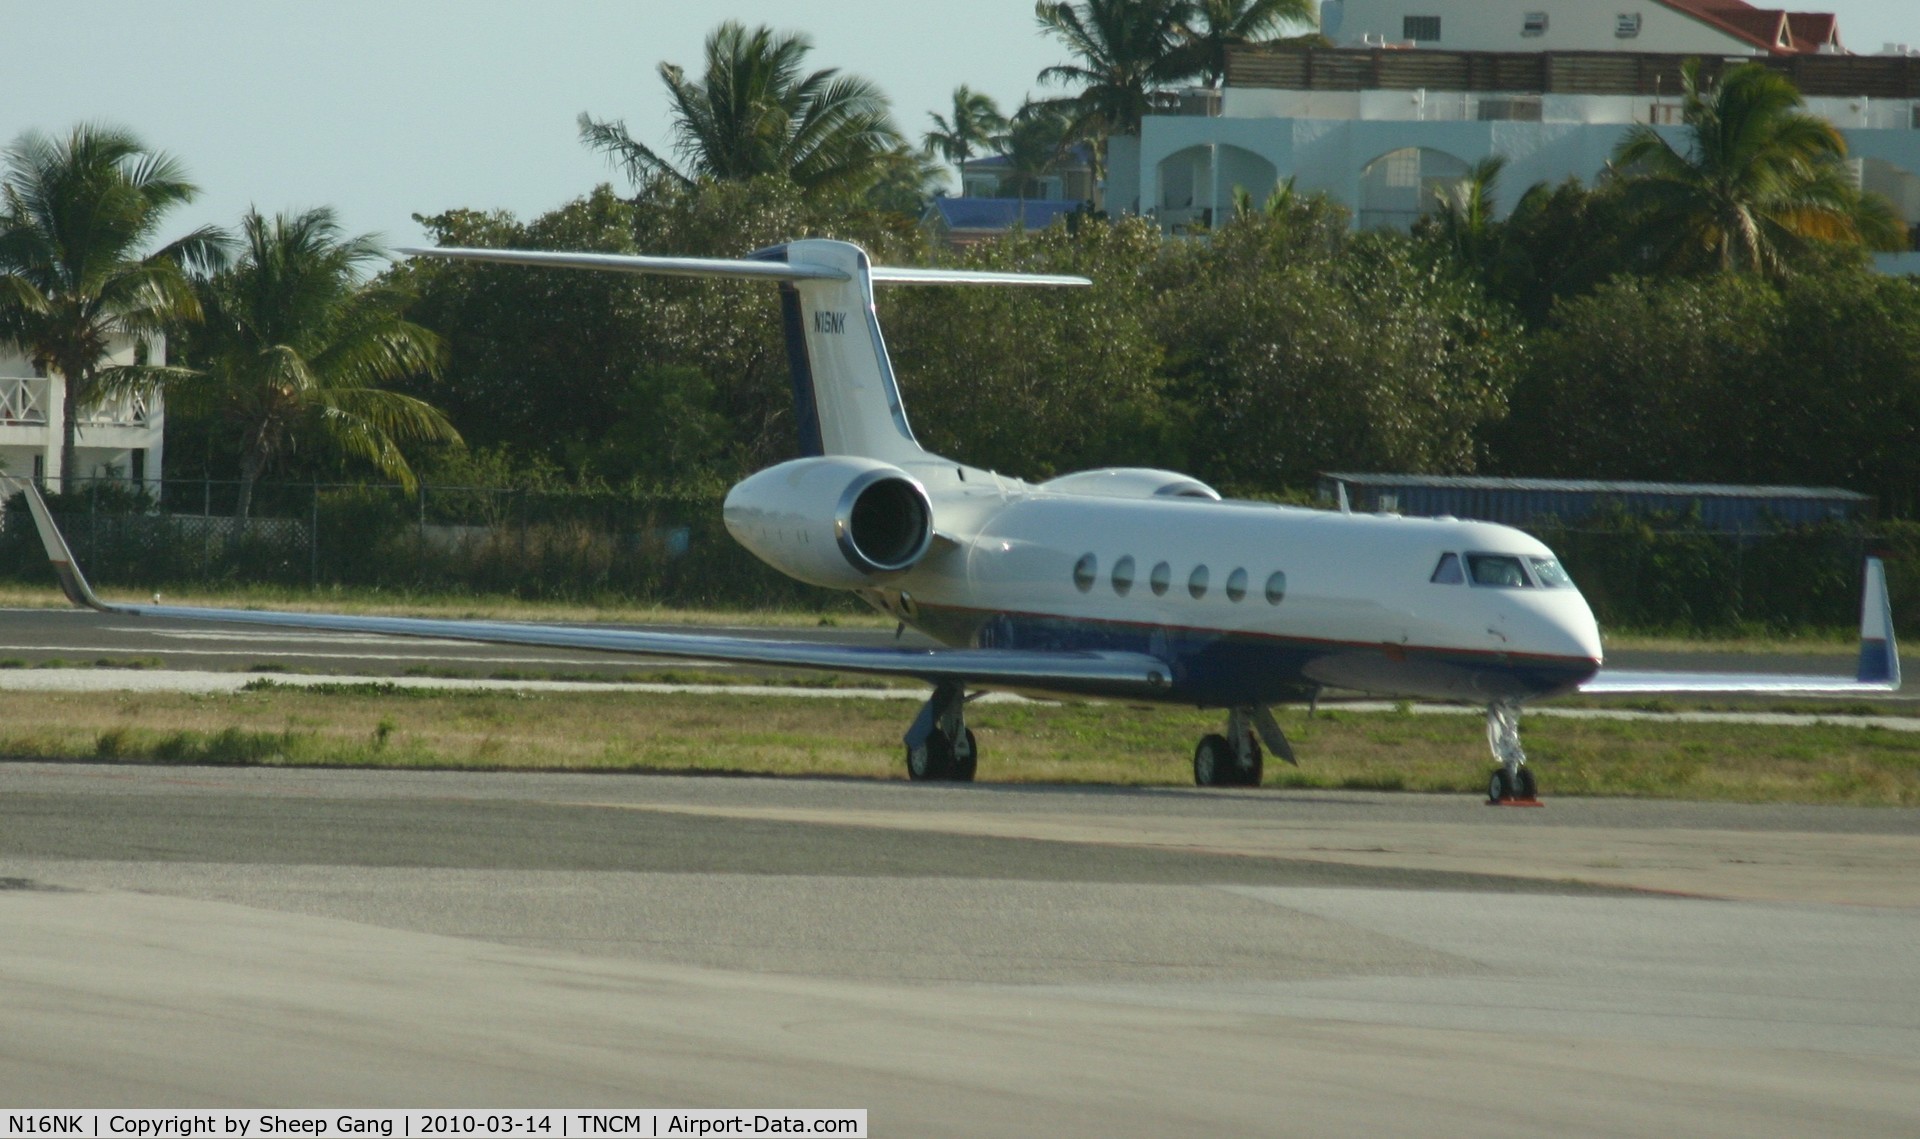 N16NK, 1999 Gulfstream Aerospace V C/N 585, So sorry for this one its behind glass it's N16NK